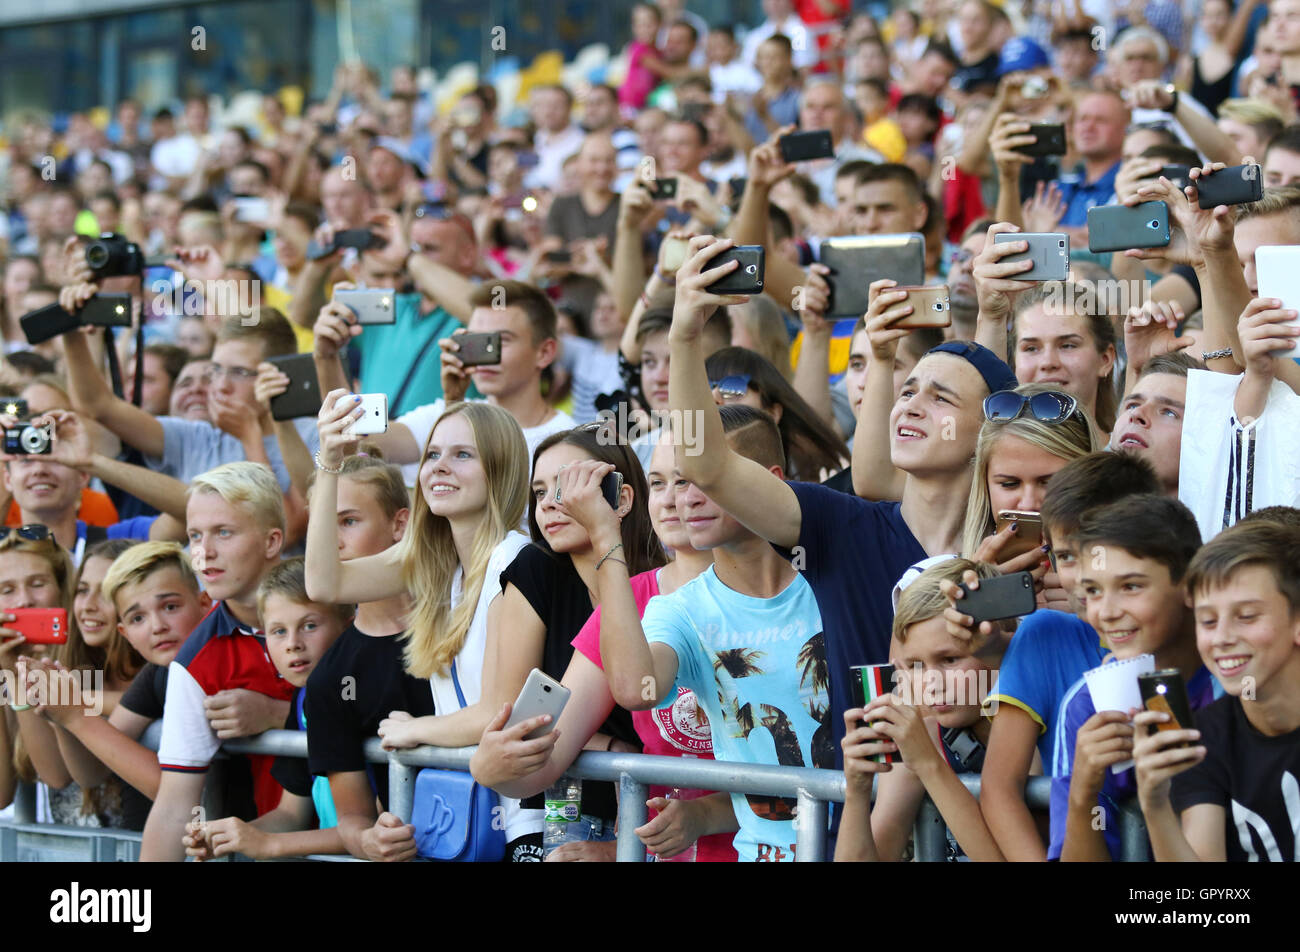 Young football supporters watch the Open training session of Ukraine National Football Team Stock Photo